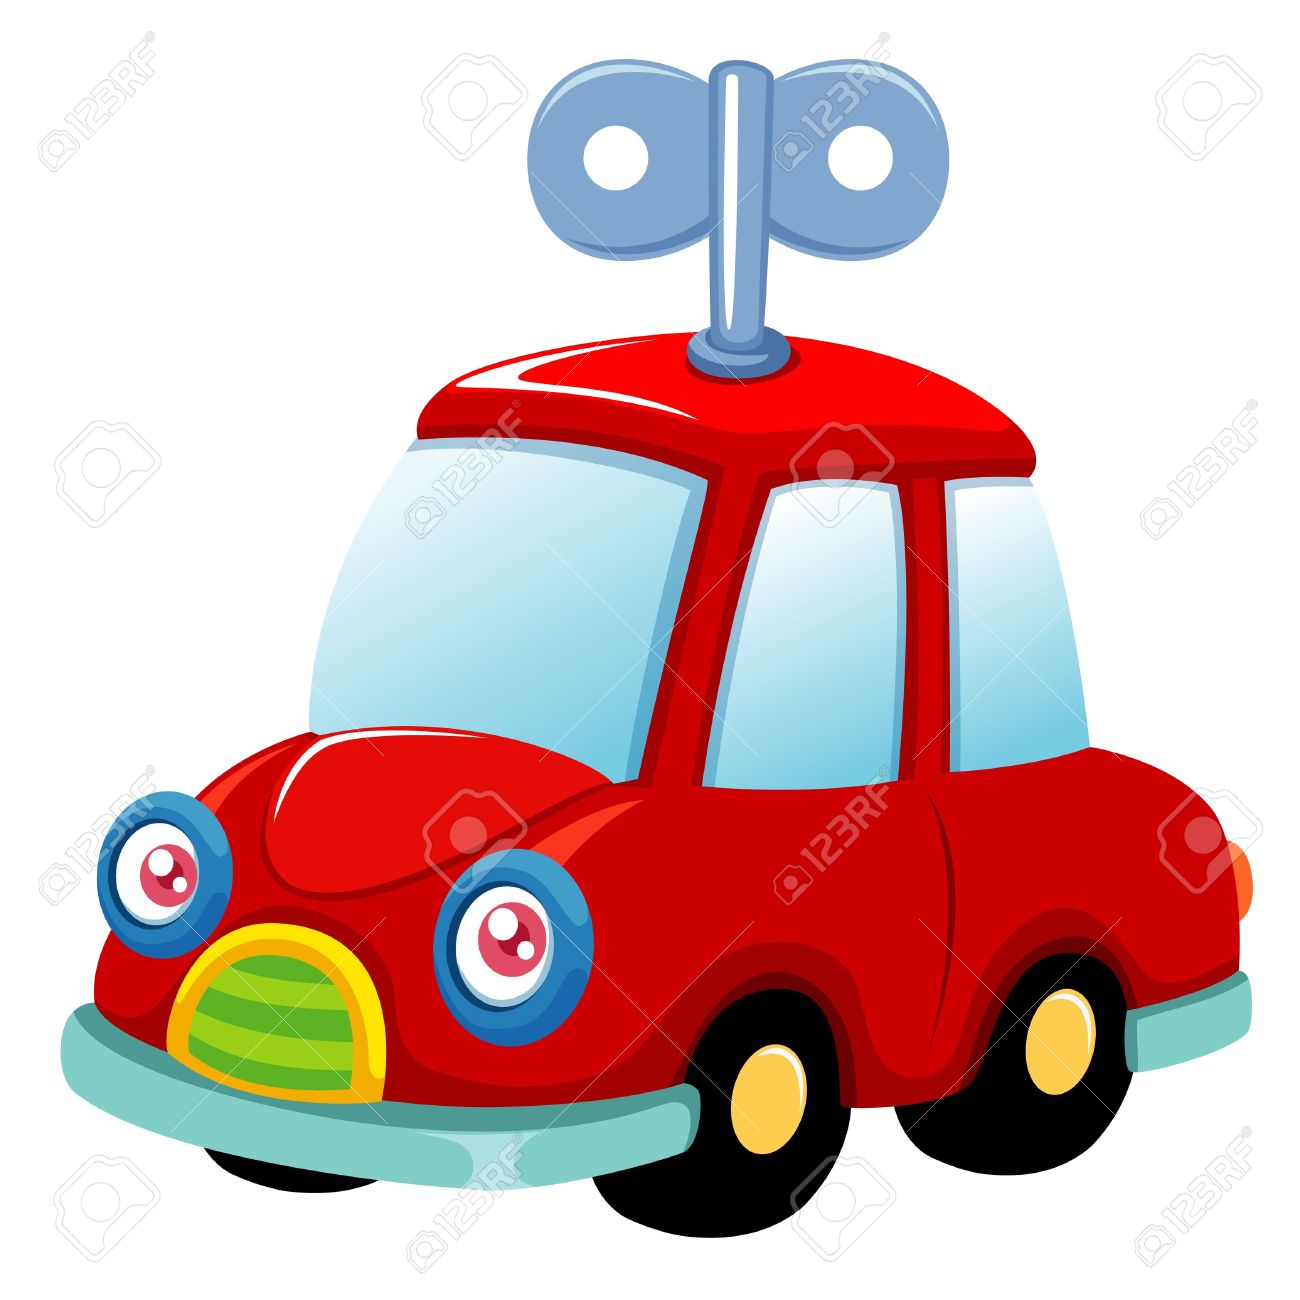 toys clipart images - photo #36